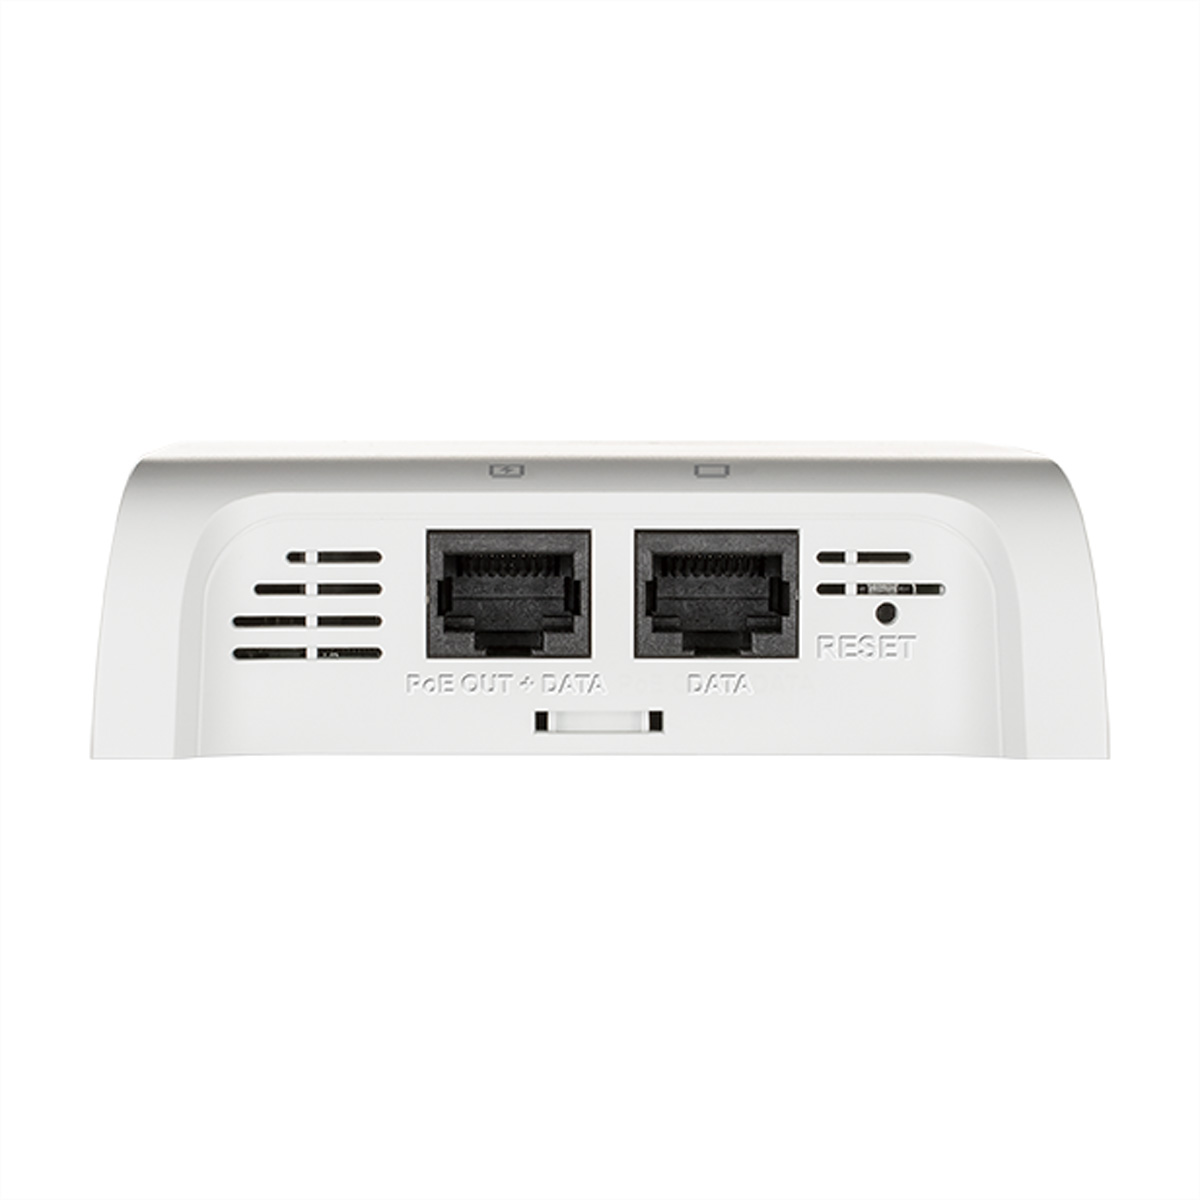 DAP-2622 AC1200 In-Wall Access WLAN PoE Points Poin 1,2 Access Wireless Gbit/s Wave D-LINK 2